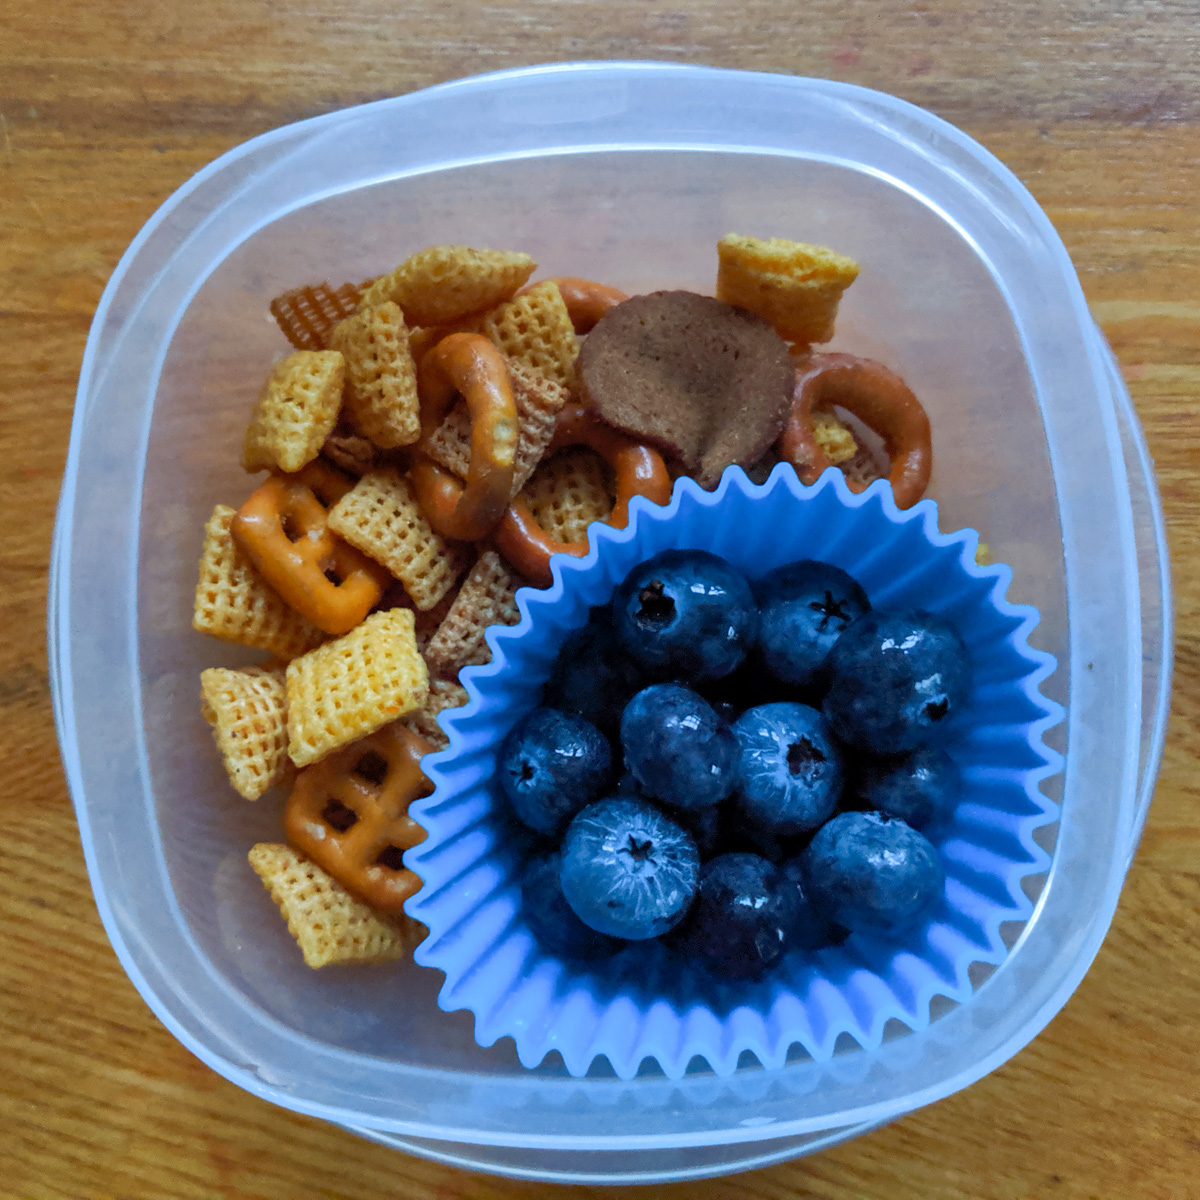 A cup of chex mix and fresh blueberries in a silicone muffin cup to keep it separated.